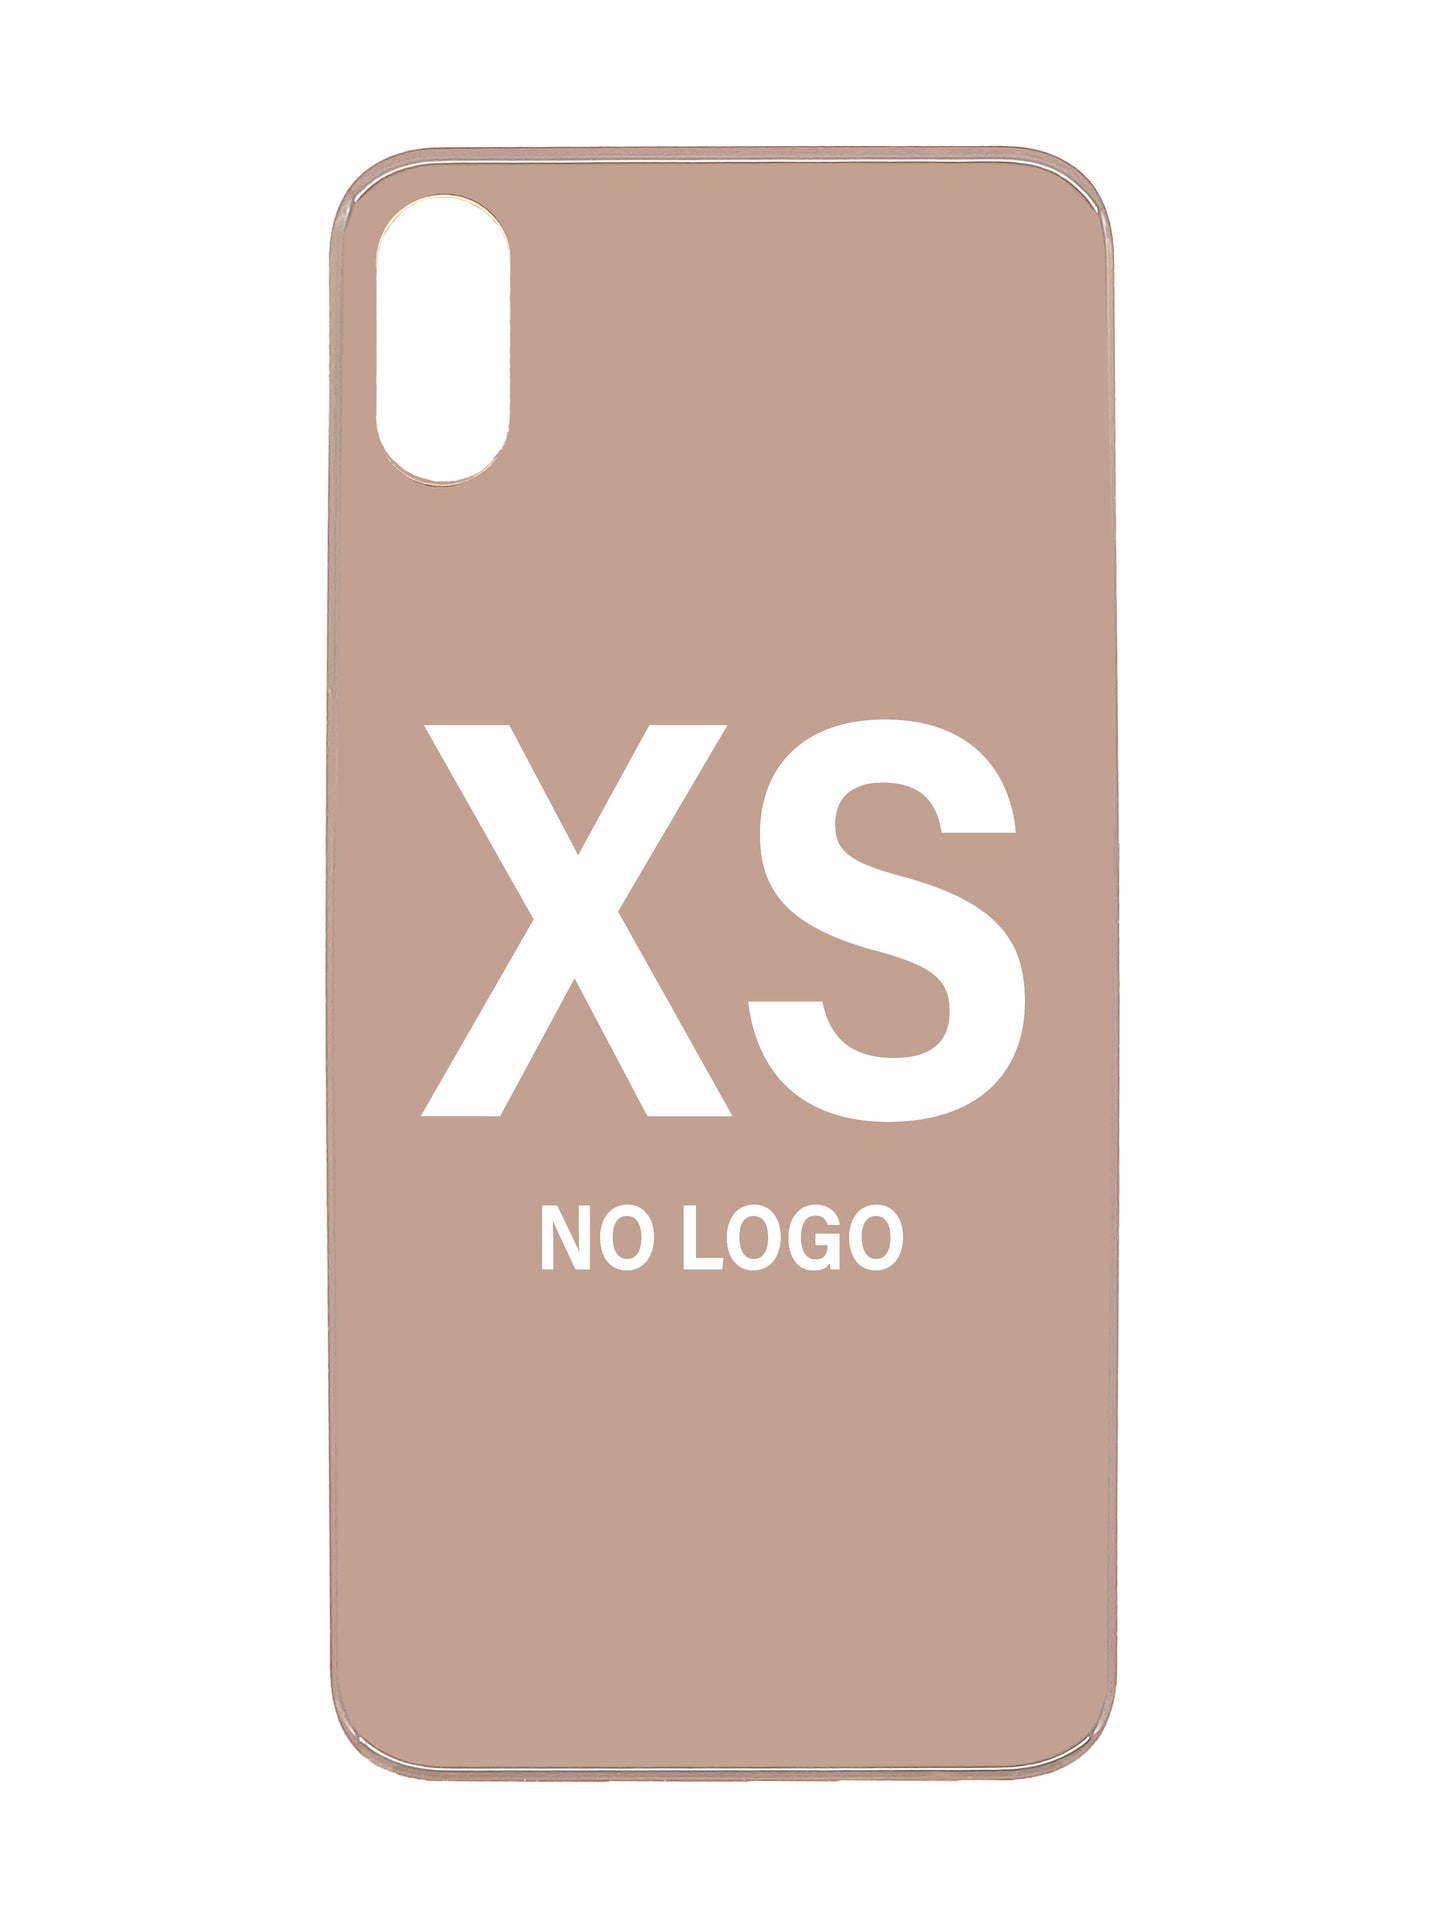 iPhone XS Back Glass (No Logo) (Rose Gold)